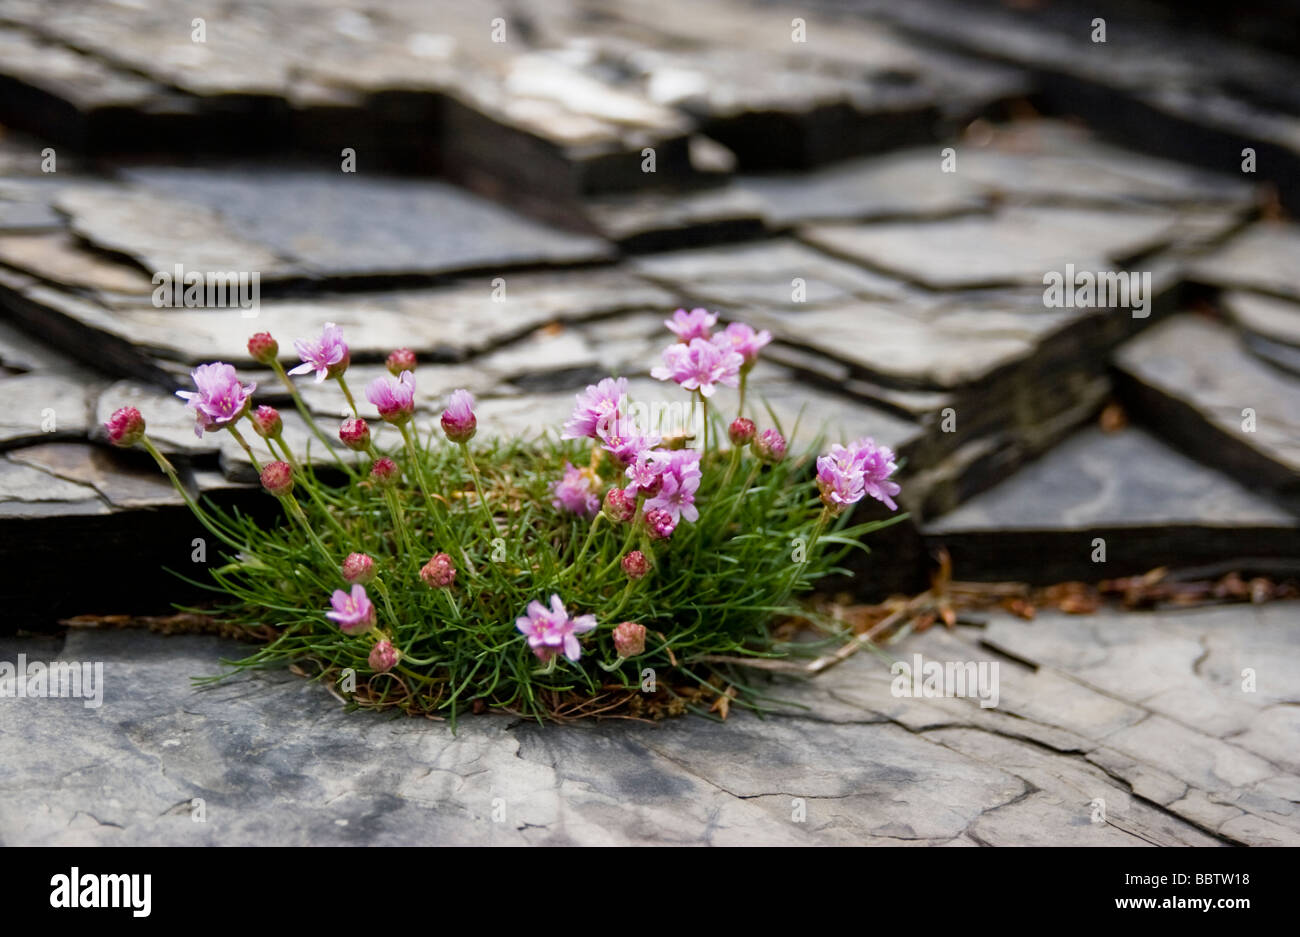 Pink Sea Thrift (Armeria maritima) growing on shale, Diabaig, Wester Ross Stock Photo